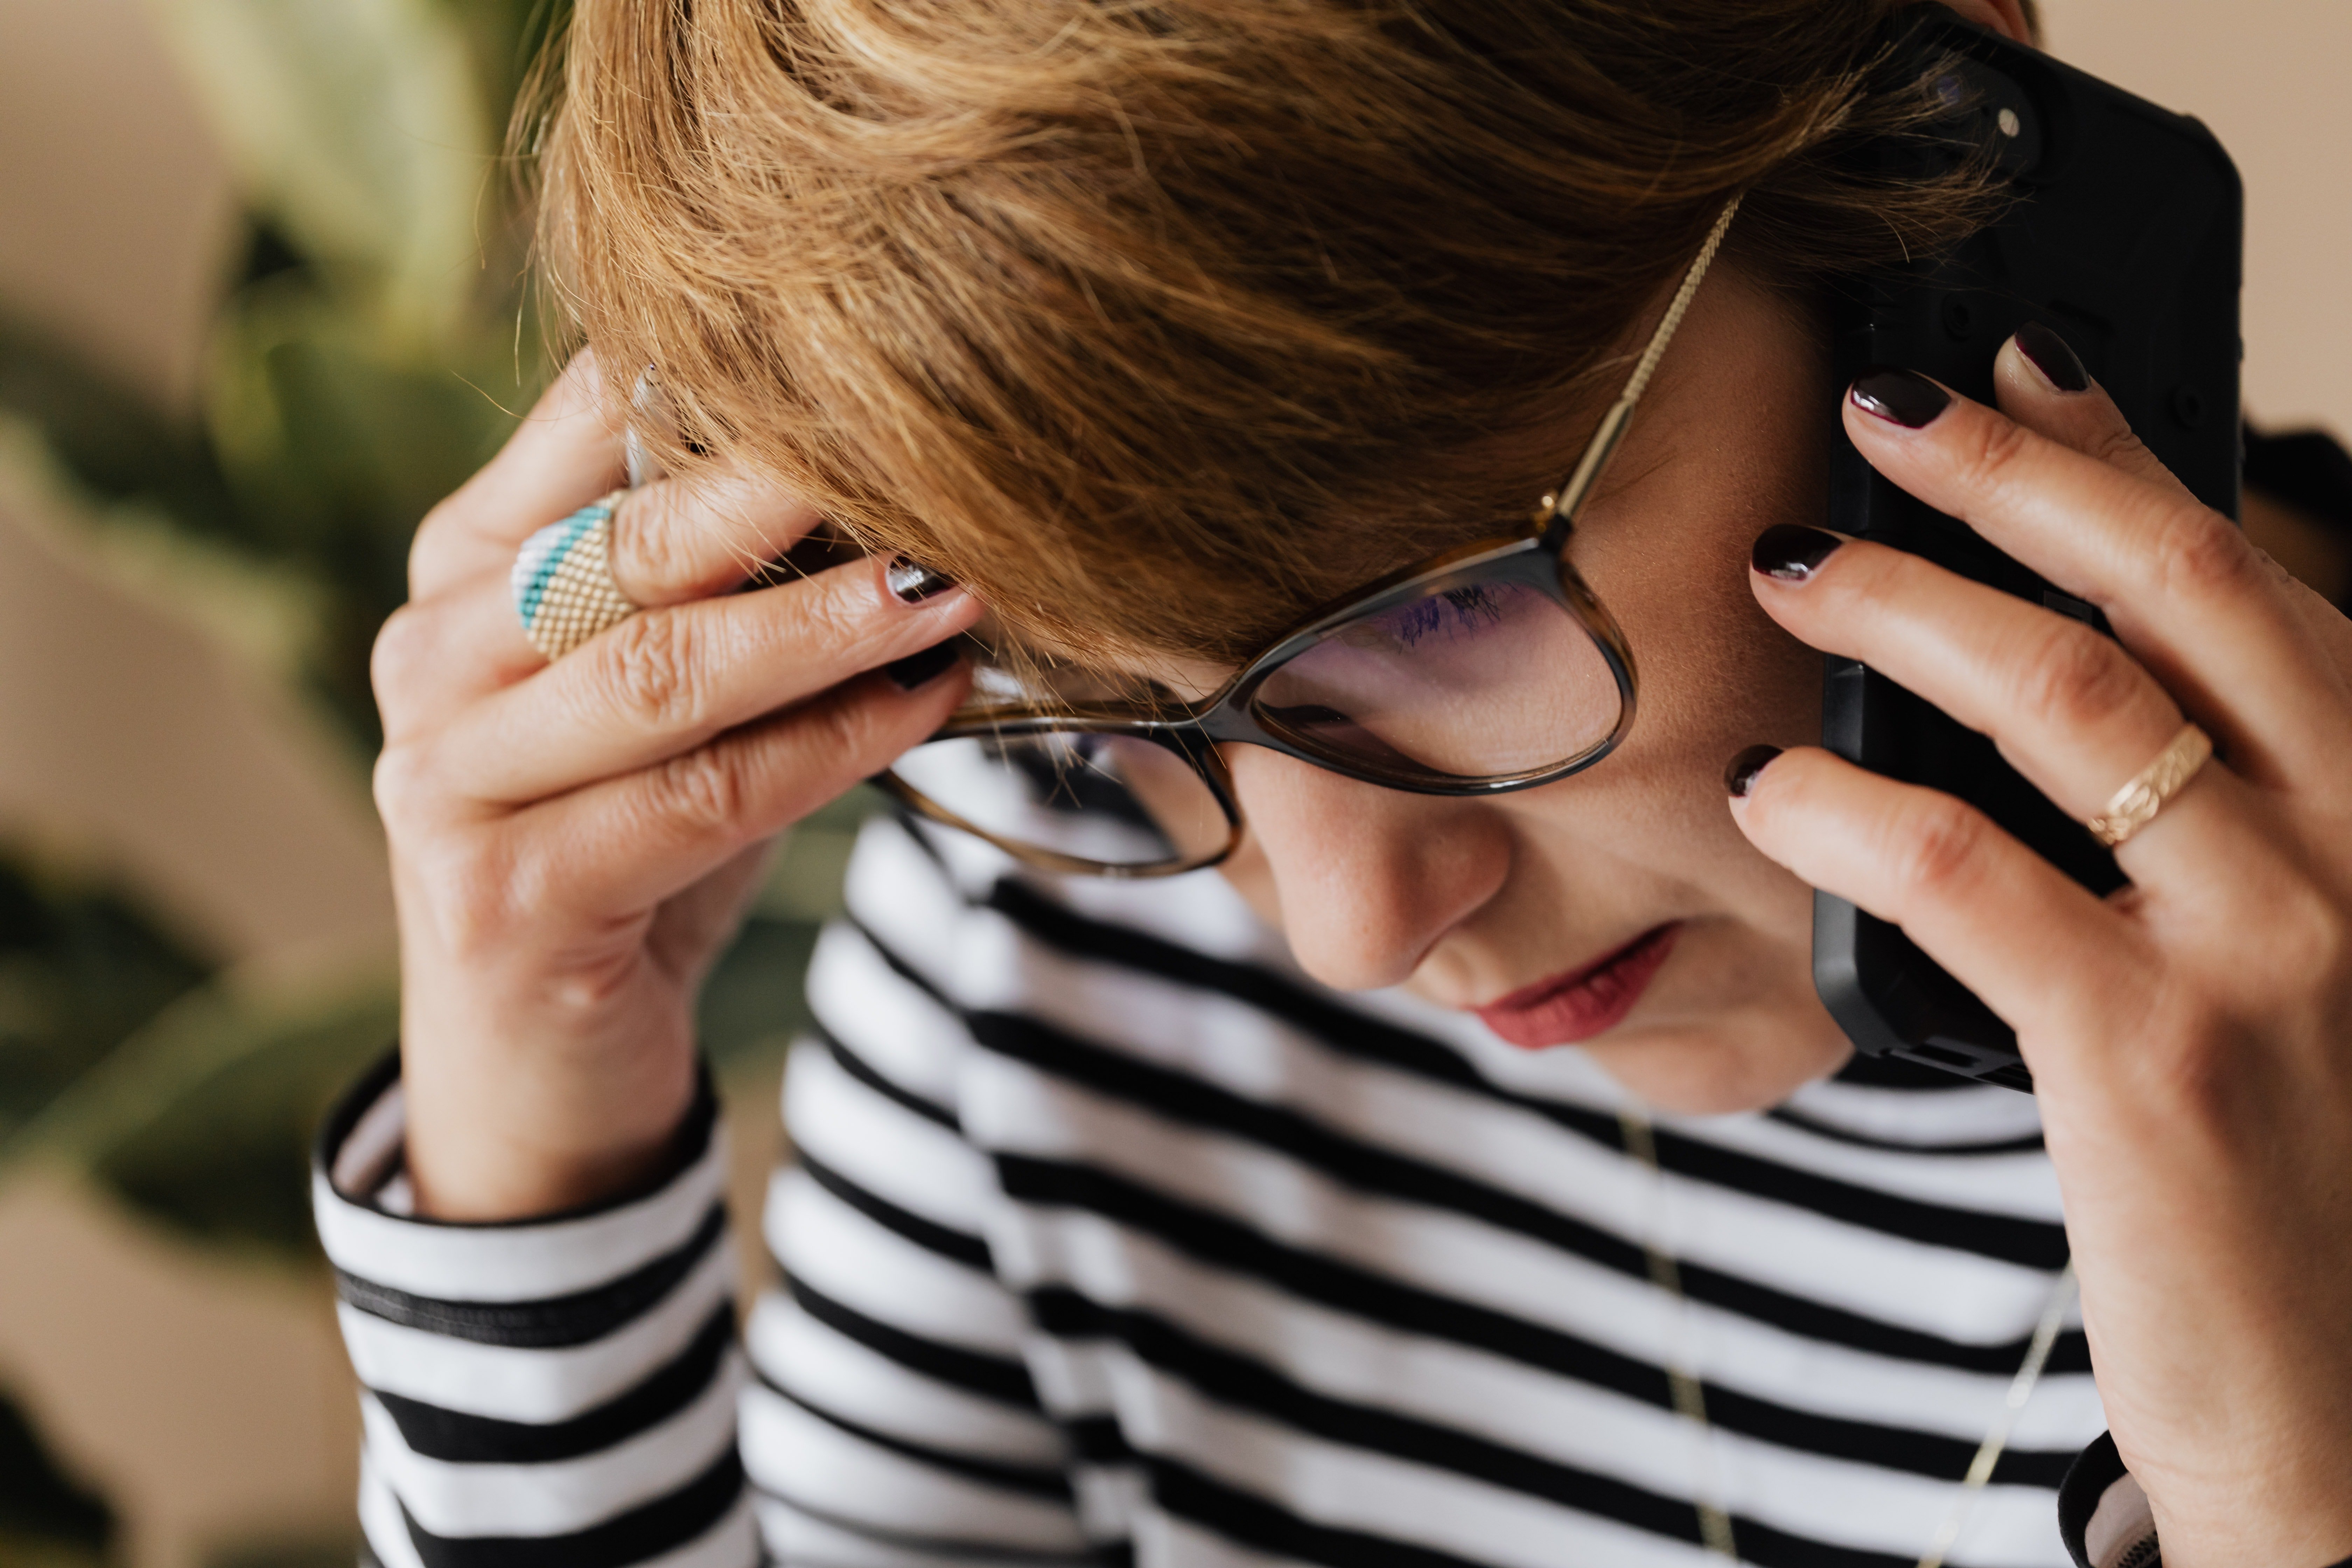 Christine didn't understand why Brian was so anxious on the call. | Source: Pexels